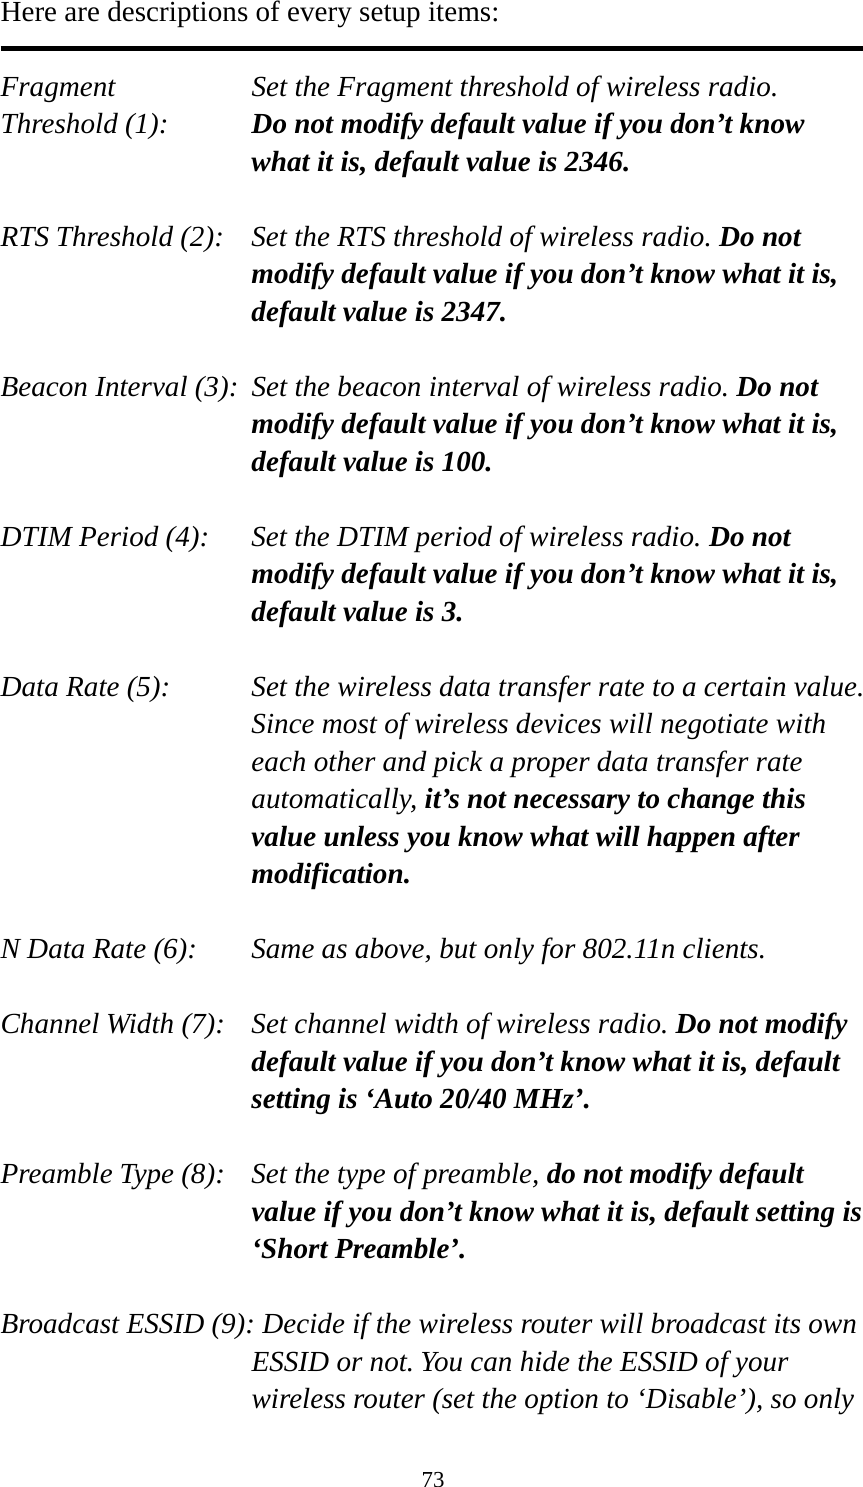 73 Here are descriptions of every setup items:  Fragment  Set the Fragment threshold of wireless radio.    Threshold (1):  Do not modify default value if you don’t know what it is, default value is 2346.  RTS Threshold (2):    Set the RTS threshold of wireless radio. Do not modify default value if you don’t know what it is, default value is 2347.  Beacon Interval (3):  Set the beacon interval of wireless radio. Do not modify default value if you don’t know what it is, default value is 100.  DTIM Period (4):    Set the DTIM period of wireless radio. Do not modify default value if you don’t know what it is, default value is 3.  Data Rate (5):    Set the wireless data transfer rate to a certain value. Since most of wireless devices will negotiate with each other and pick a proper data transfer rate automatically, it’s not necessary to change this value unless you know what will happen after modification.  N Data Rate (6):   Same as above, but only for 802.11n clients.  Channel Width (7):    Set channel width of wireless radio. Do not modify default value if you don’t know what it is, default setting is ‘Auto 20/40 MHz’.  Preamble Type (8):    Set the type of preamble, do not modify default value if you don’t know what it is, default setting is ‘Short Preamble’.  Broadcast ESSID (9): Decide if the wireless router will broadcast its own ESSID or not. You can hide the ESSID of your wireless router (set the option to ‘Disable’), so only 